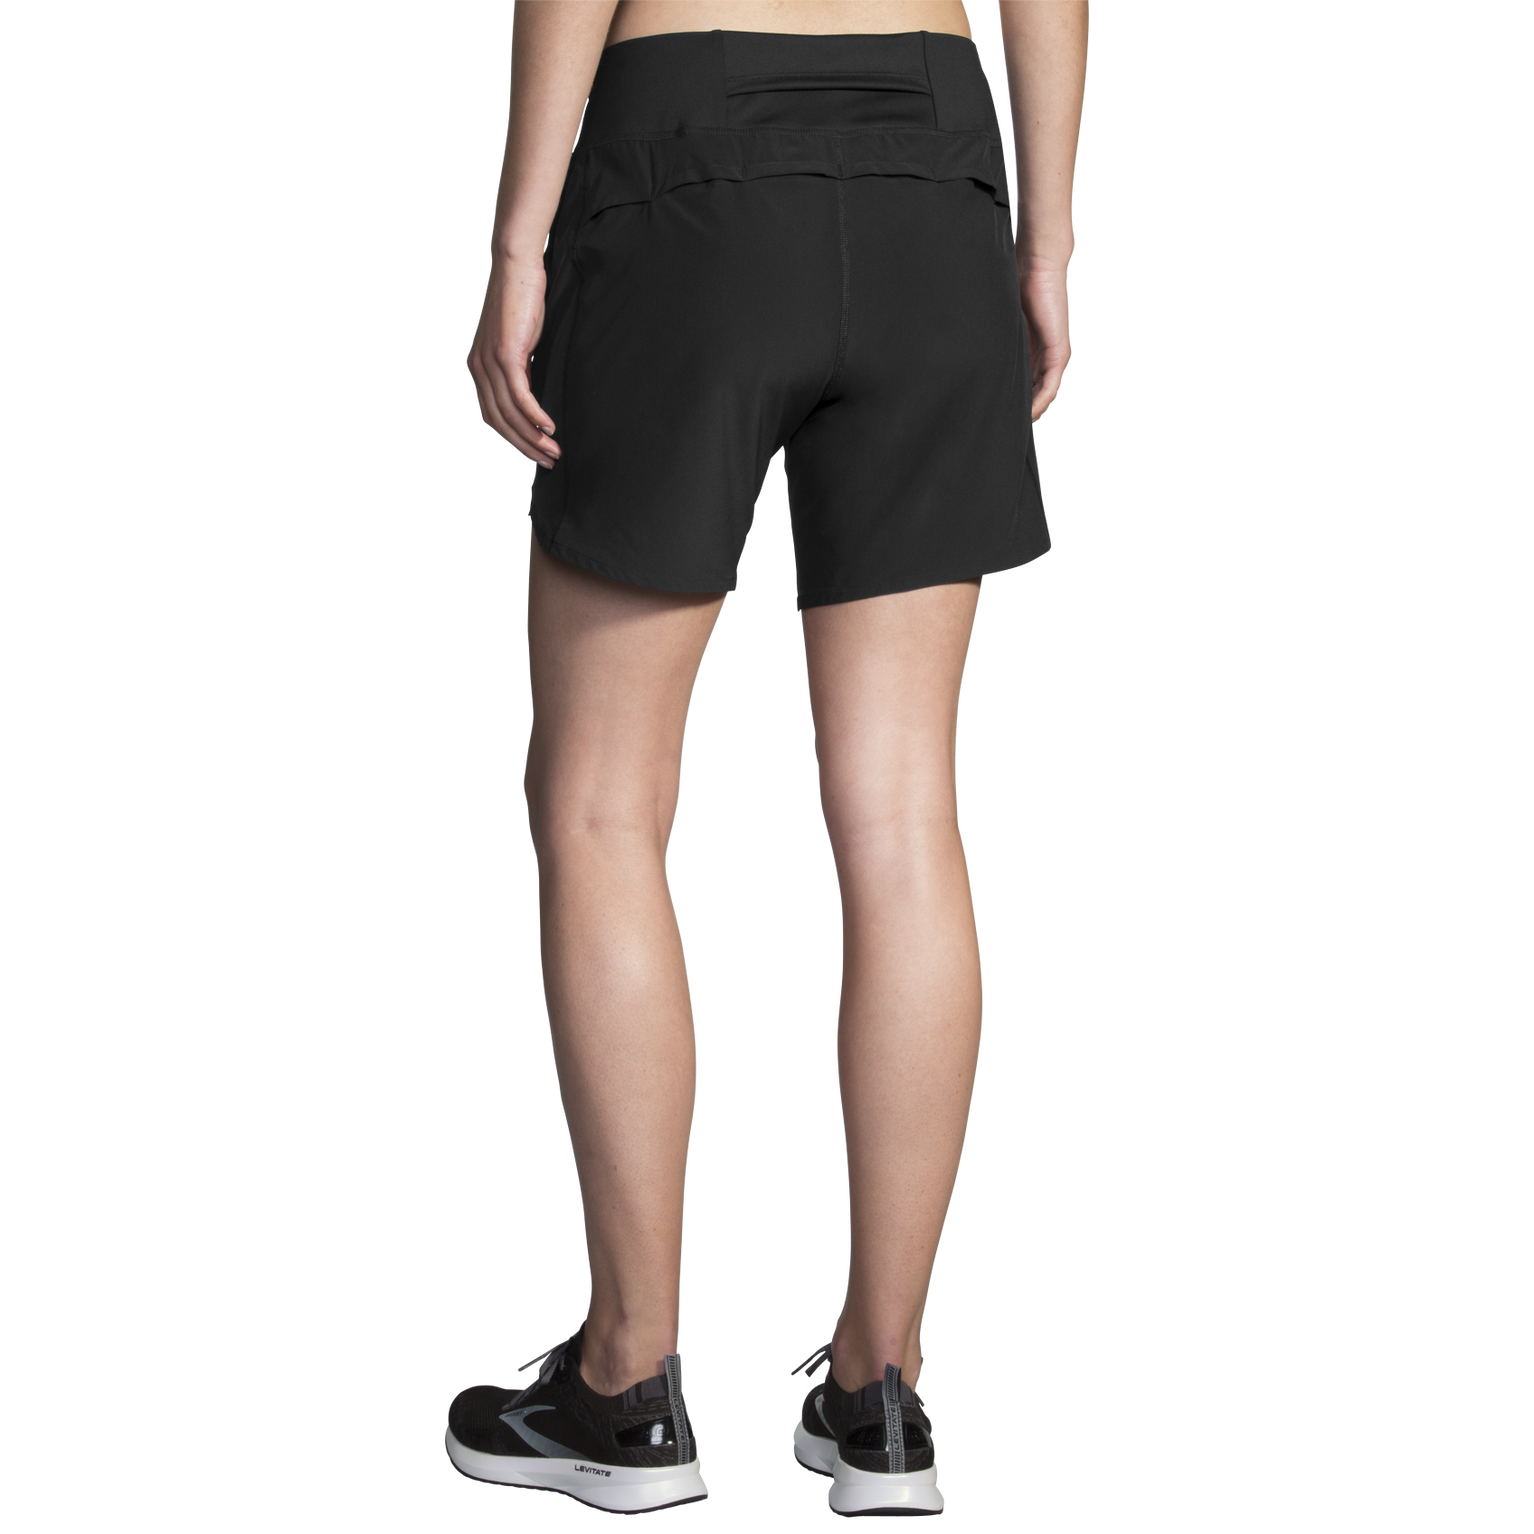 Chaser Women's 7 inch Running Shorts with Liner | Brooks Running